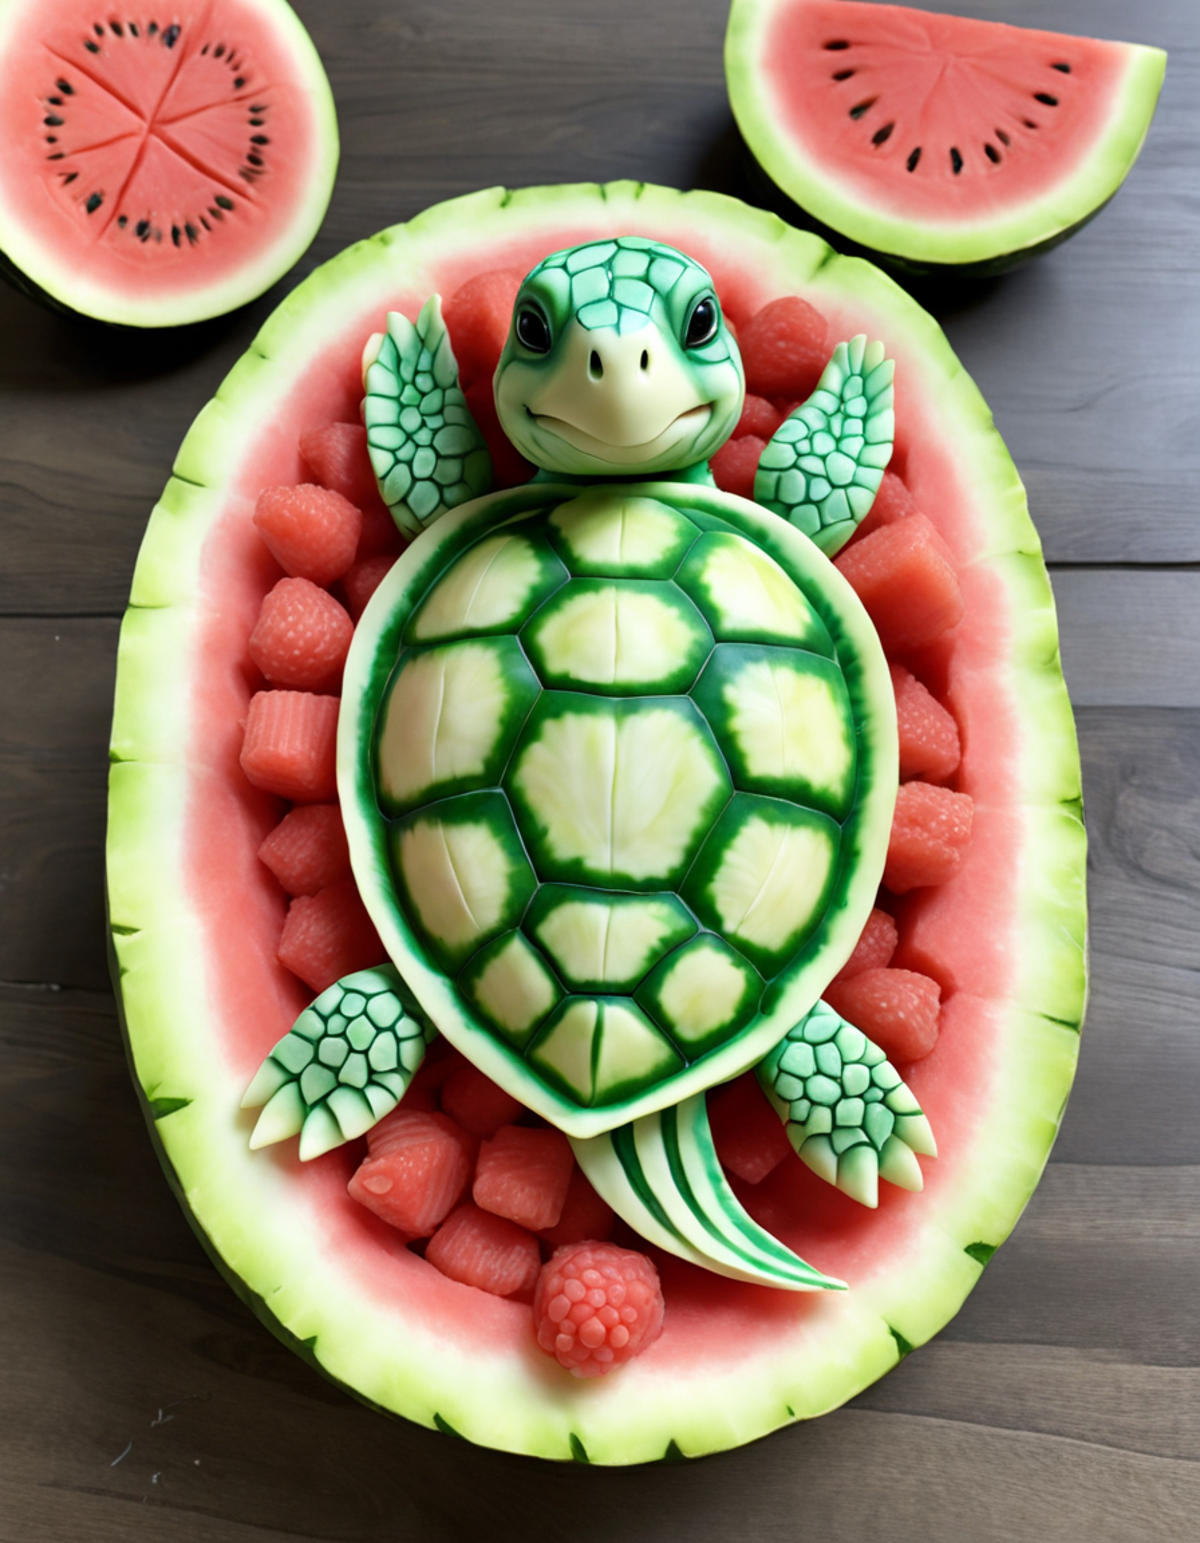 A green and white turtle sculpture made from watermelon and strawberries.